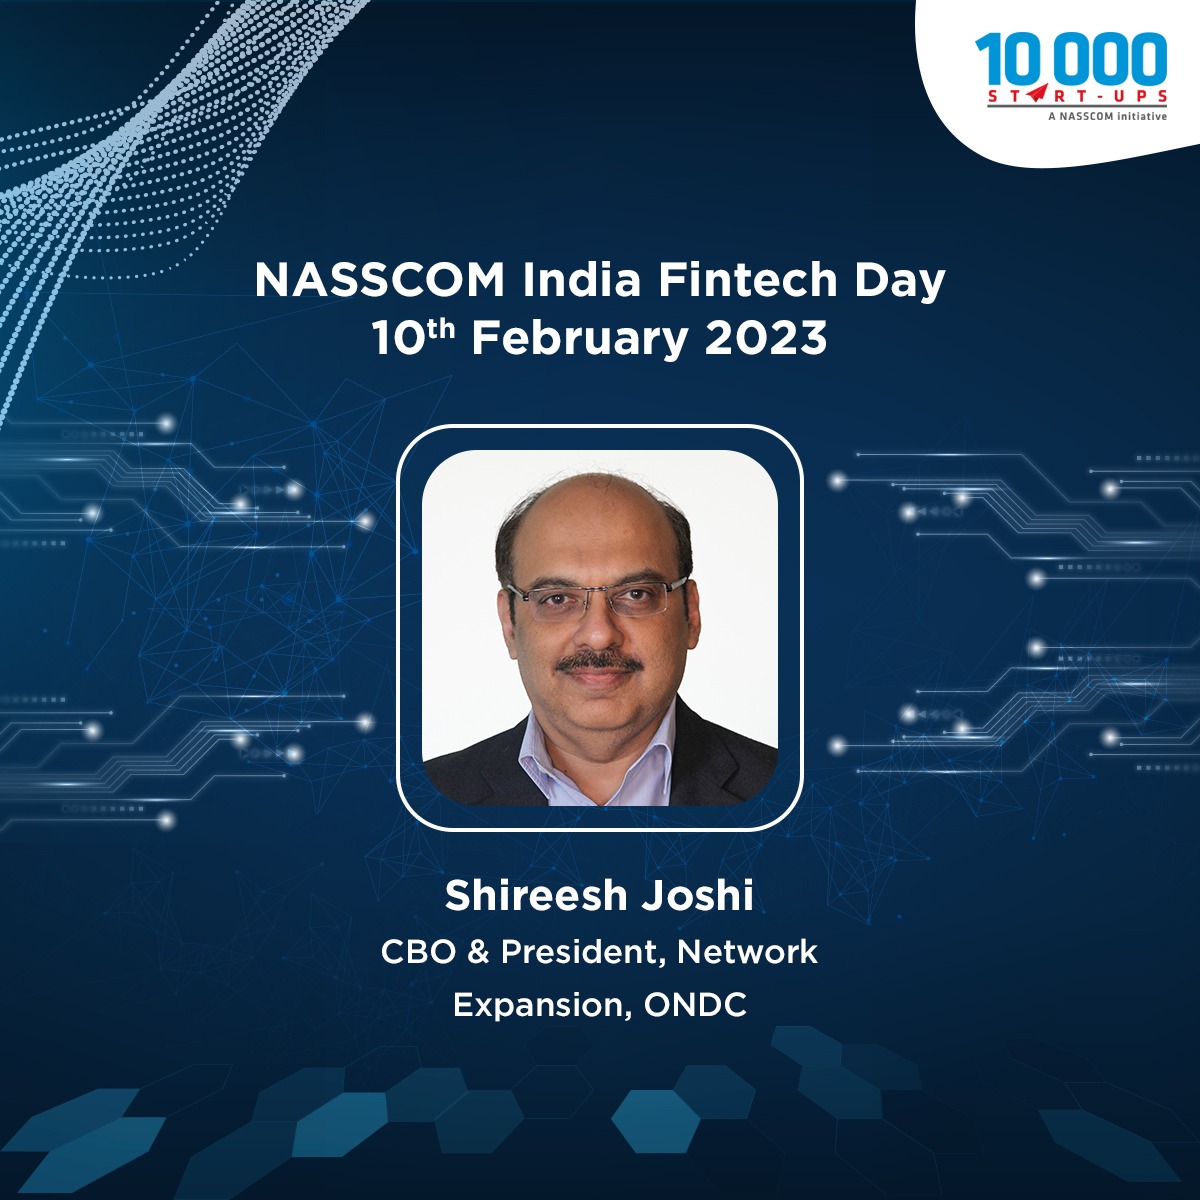 #NASSCOM India #FintechDay 2023 is hosting a session on Interoperability and Innovation – Platforms of the Future with Shireesh Joshi. 

Join us at the #NASSCOM India #FinTechDay on 10th Feb 2023 at Taj MG Road. 

Register here: bit.ly/3QHkAEp